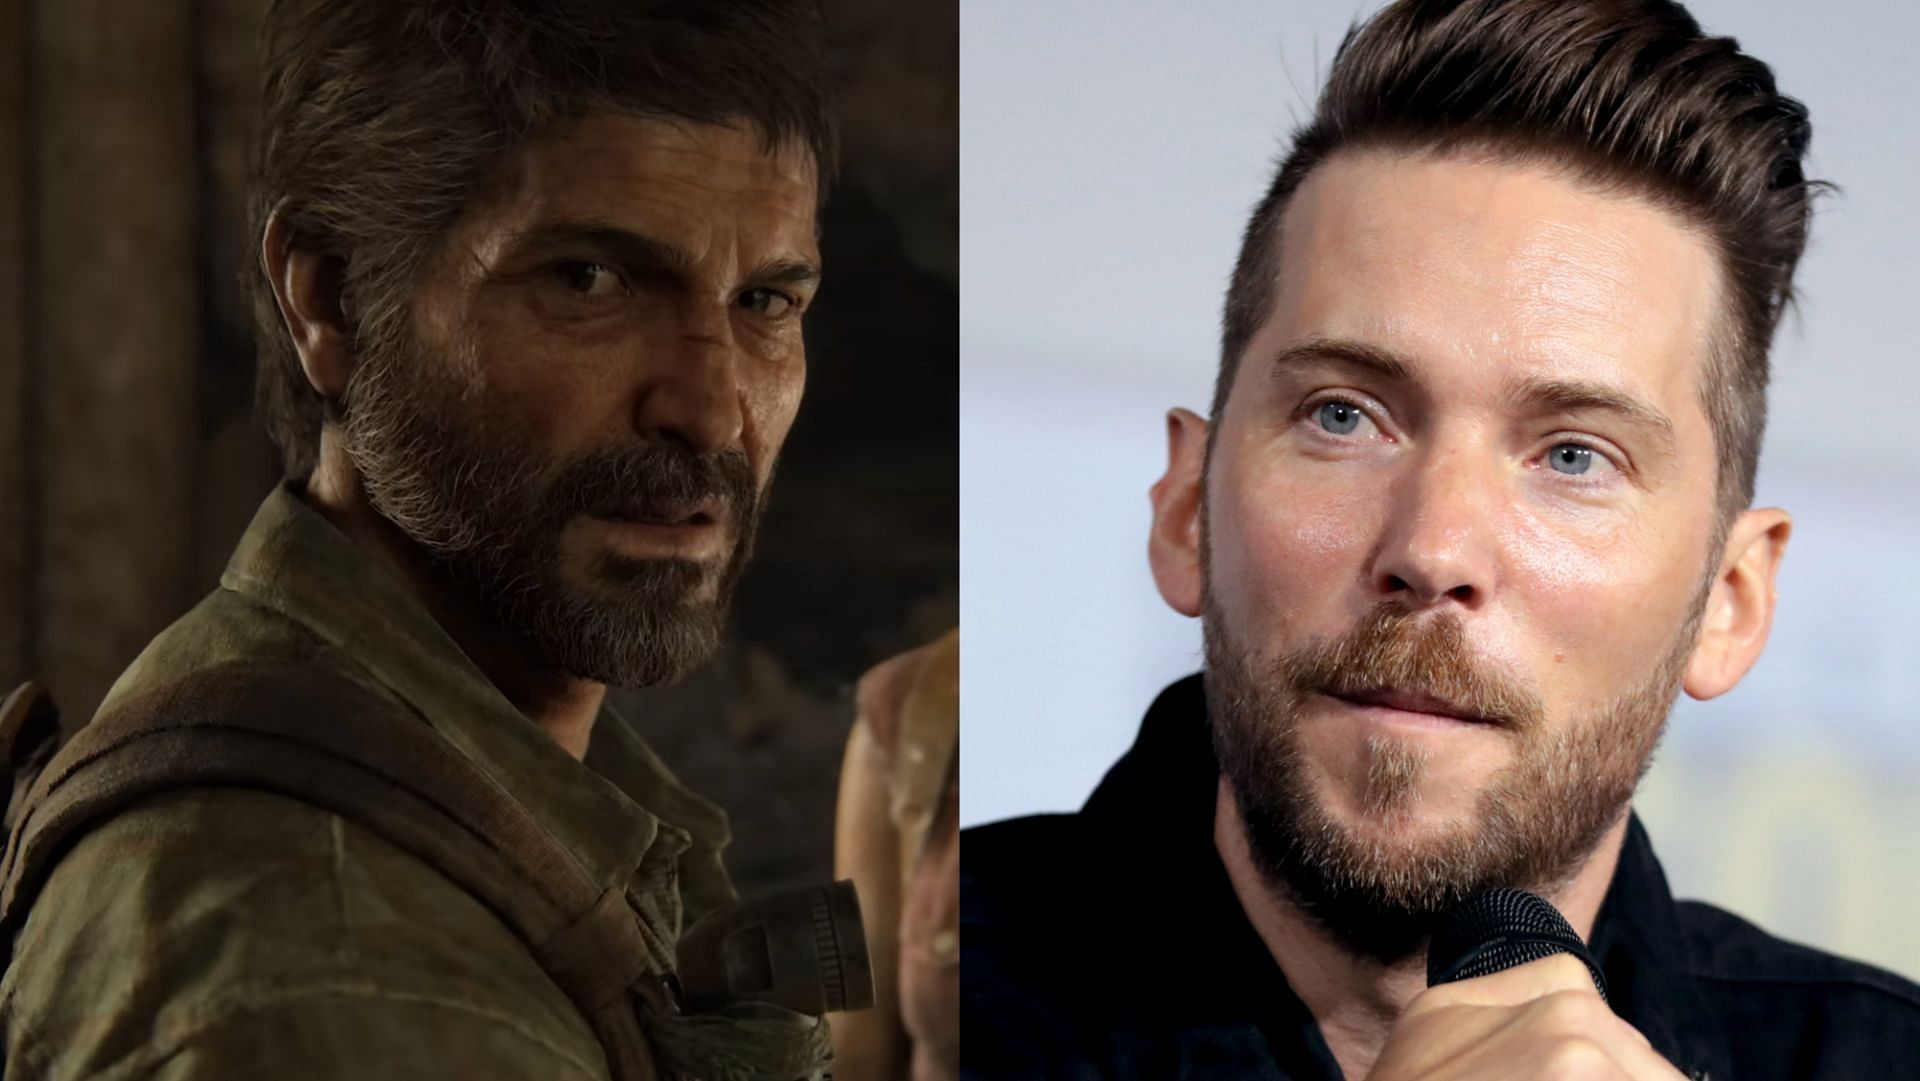 Who voices Joel in The Last of Us?